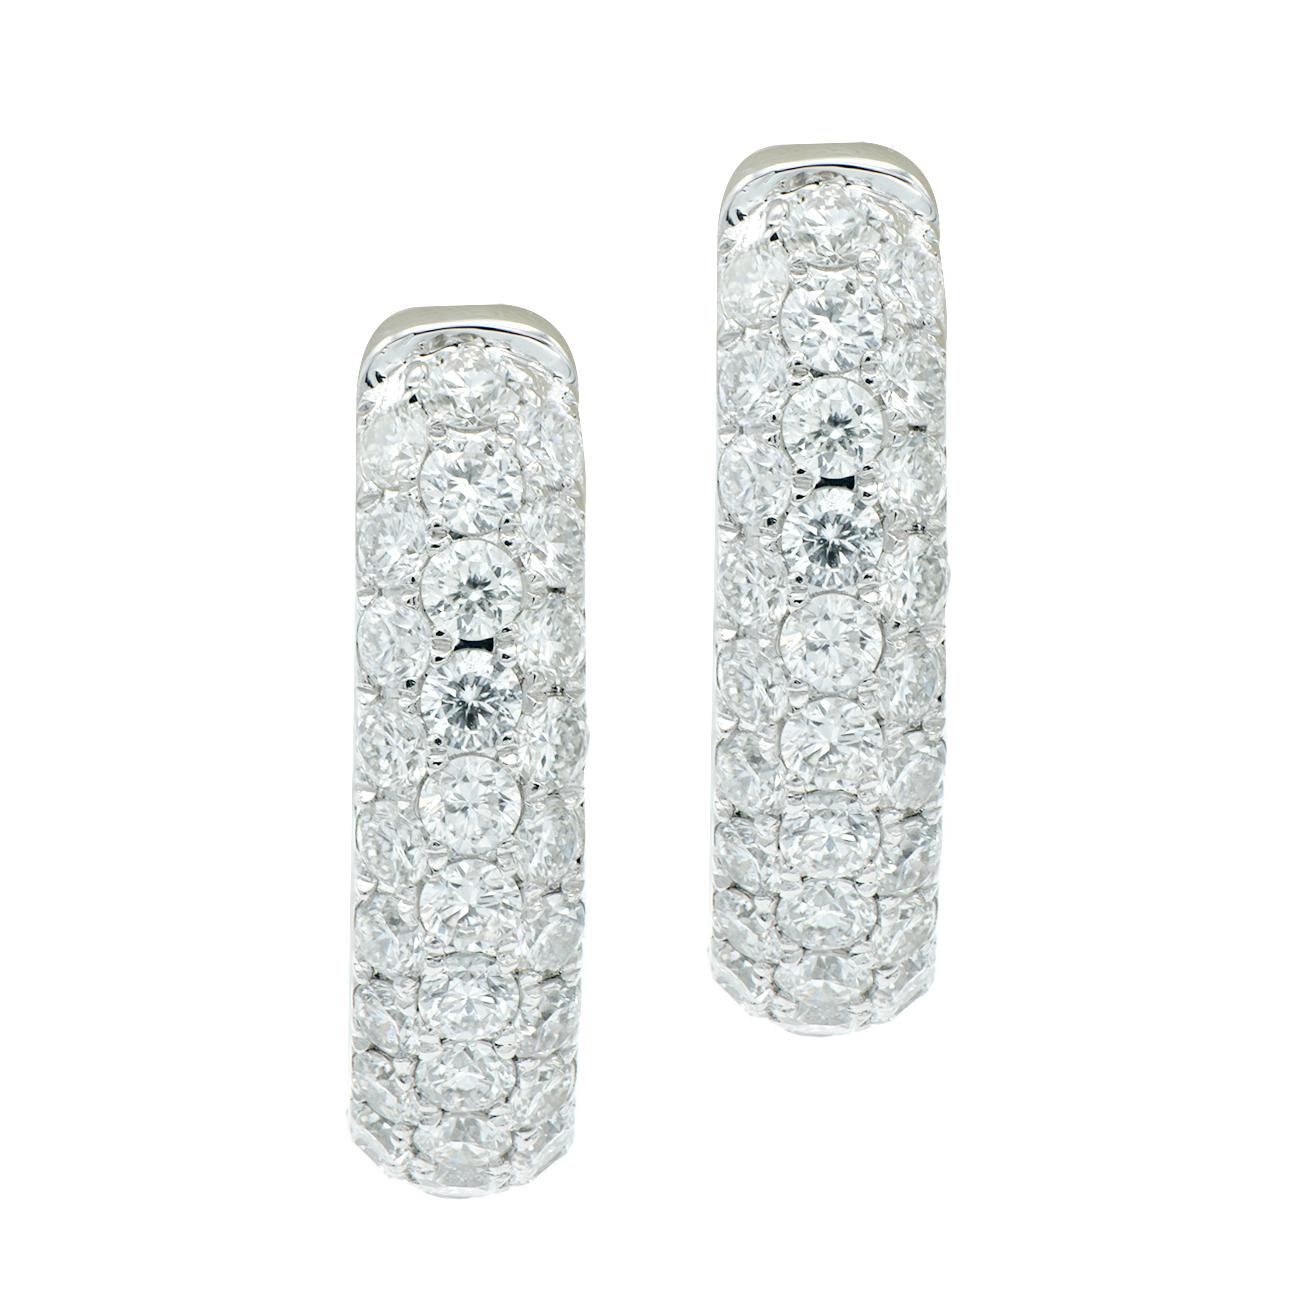 These beautiful huggie style earrings shimmer and sparkle with 3 rows of 122 SI, H color diamonds that total 3.05 carats that are on the outside of the earring and the inside of the back for shine at every angle. They are set in 6.0 grams of 14